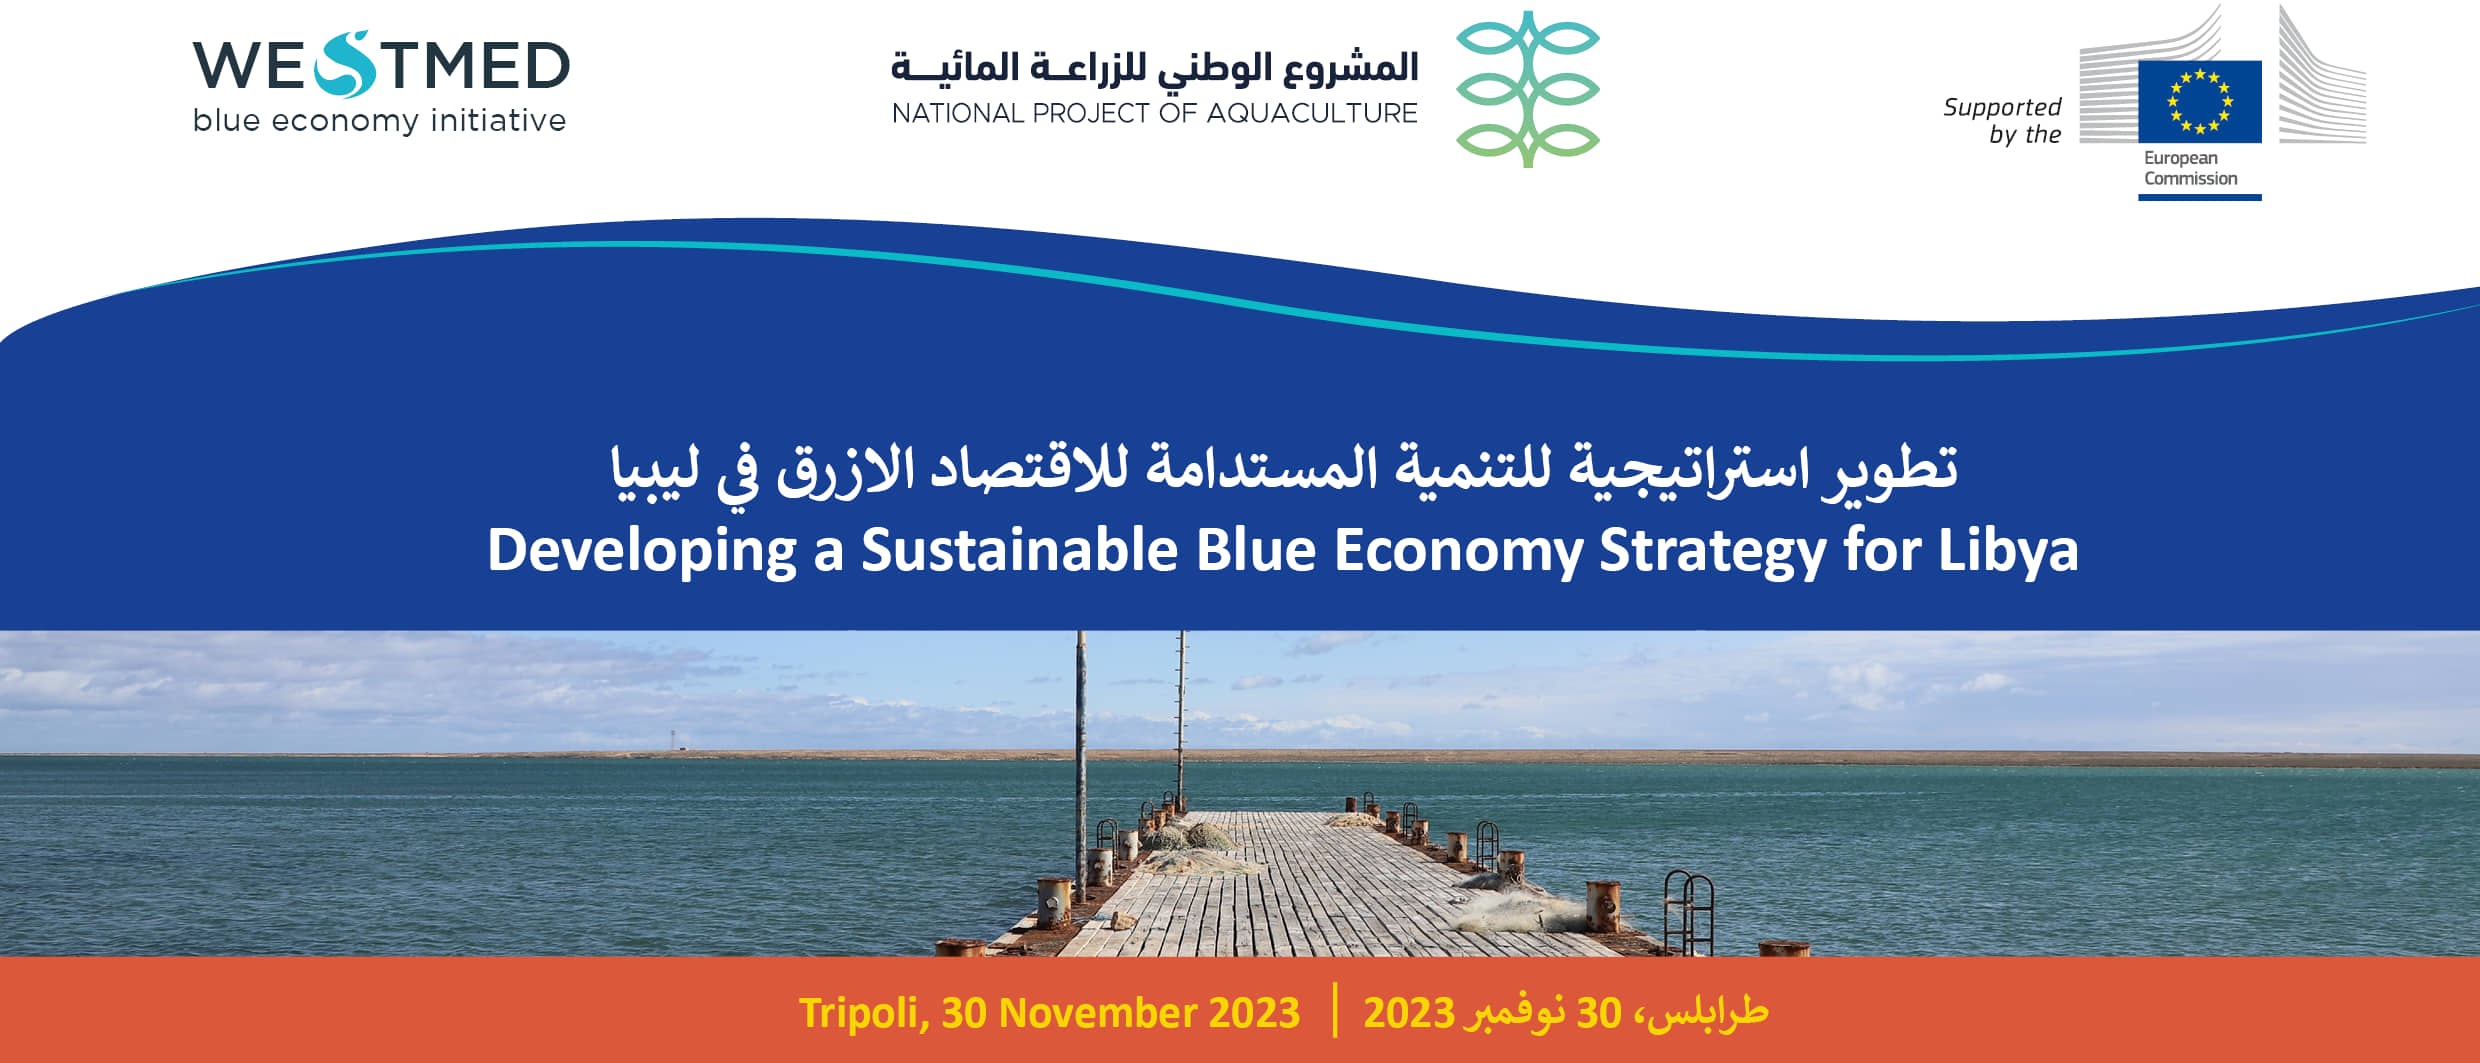 jetty going out into the sea with text announcement of WestMED national event Libya 2023